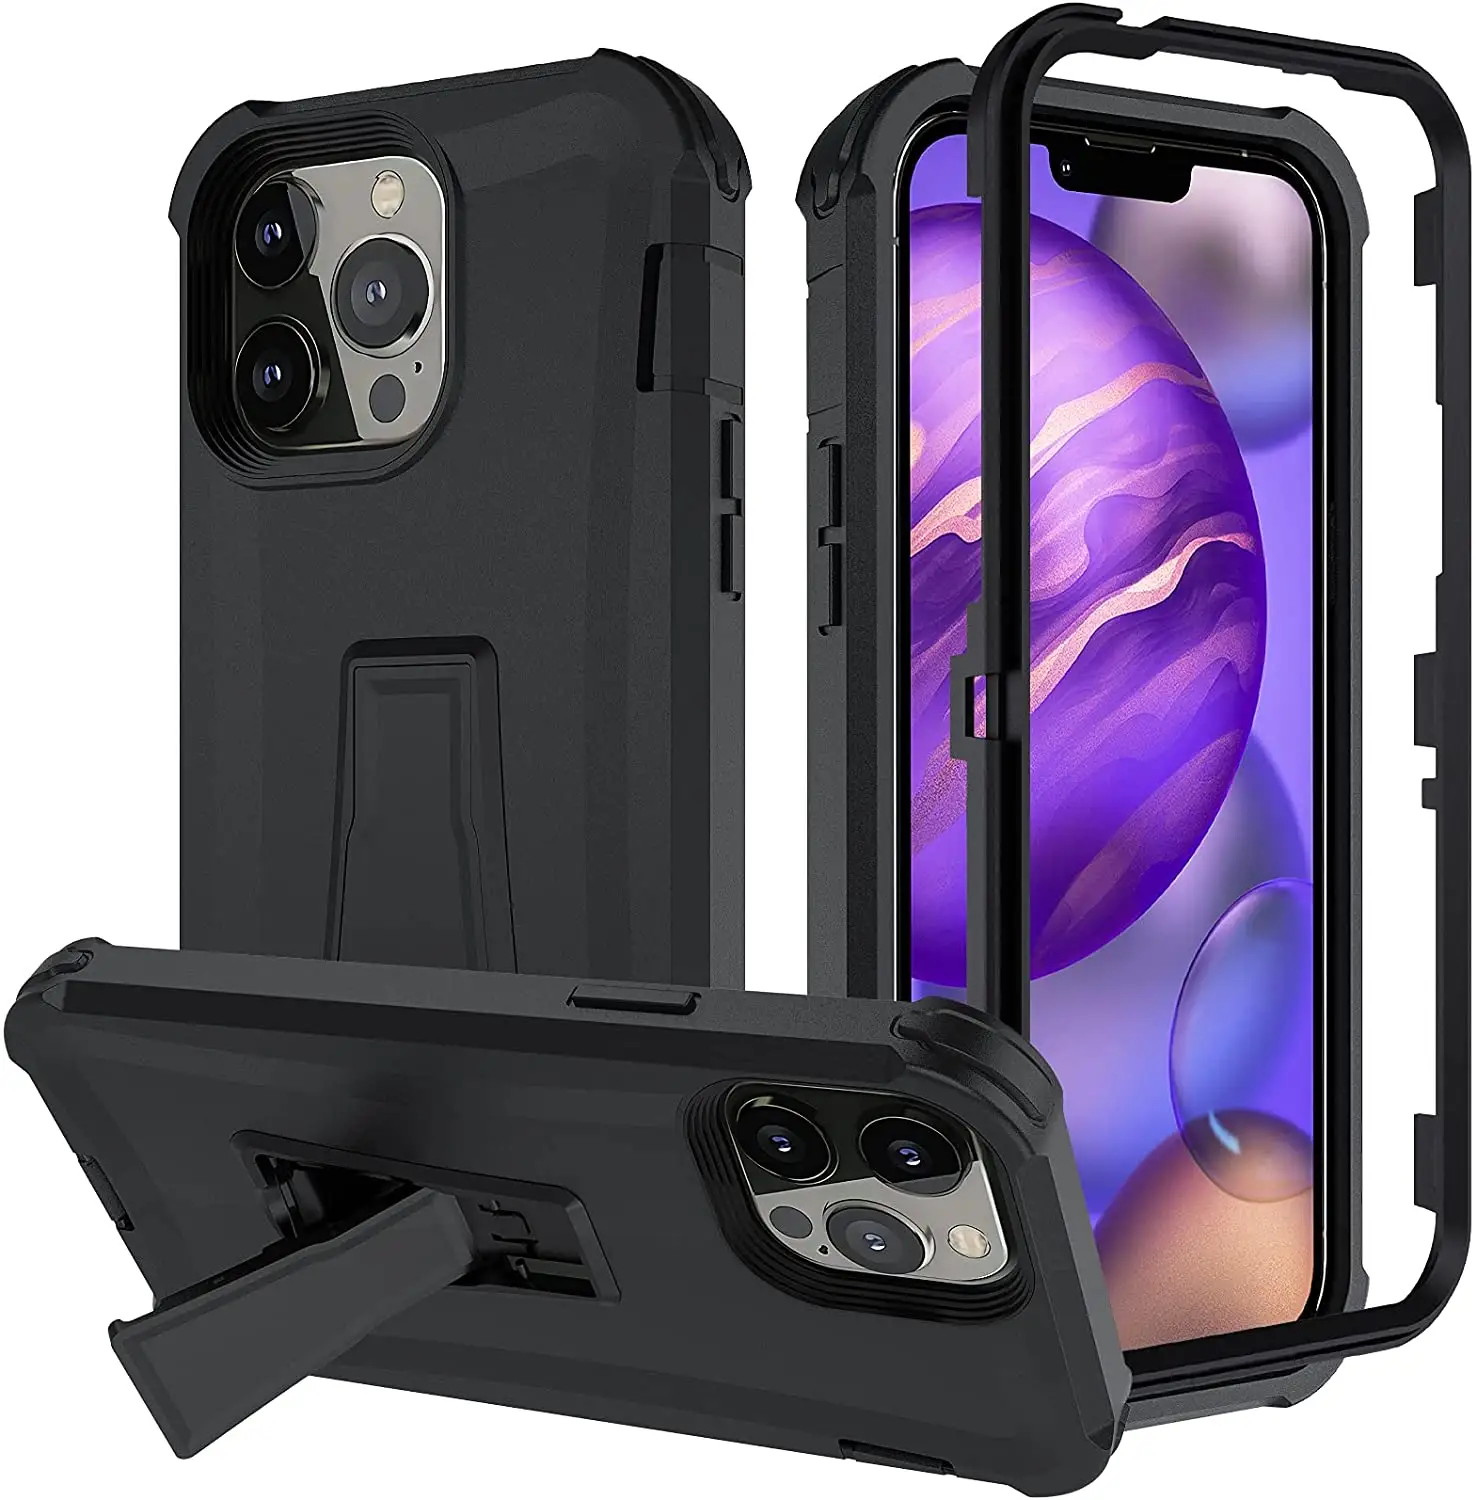 Heavy Duty Rugged Defend Case for iPhone 13 Pro Max/XR/11 Shockproof Full Body Protective Kickstand Bumper Cover